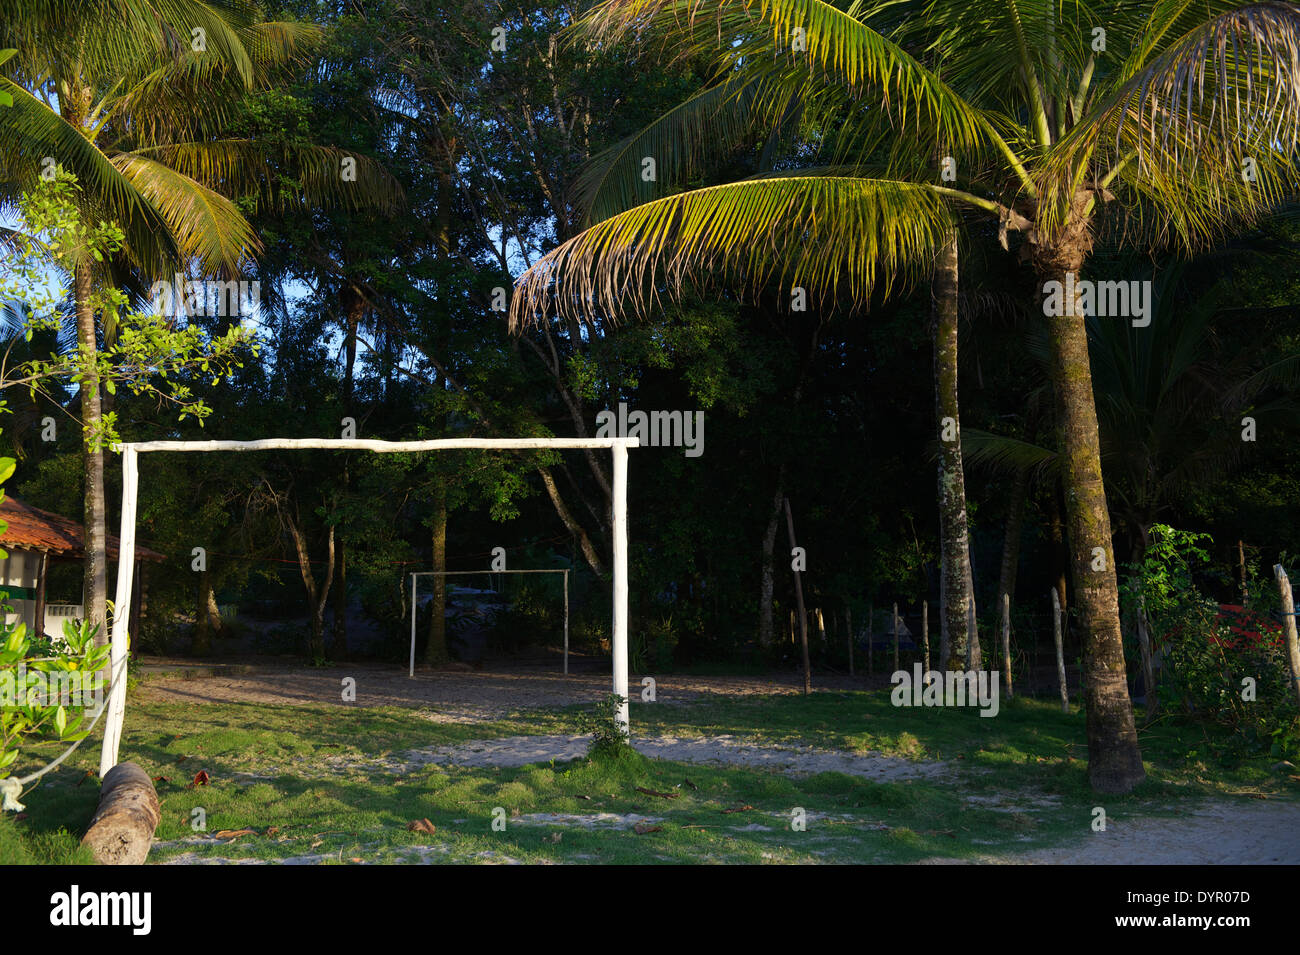 Simple tropical Brazilian football pitch with rustic goal posts surrounded by palm trees Stock Photo